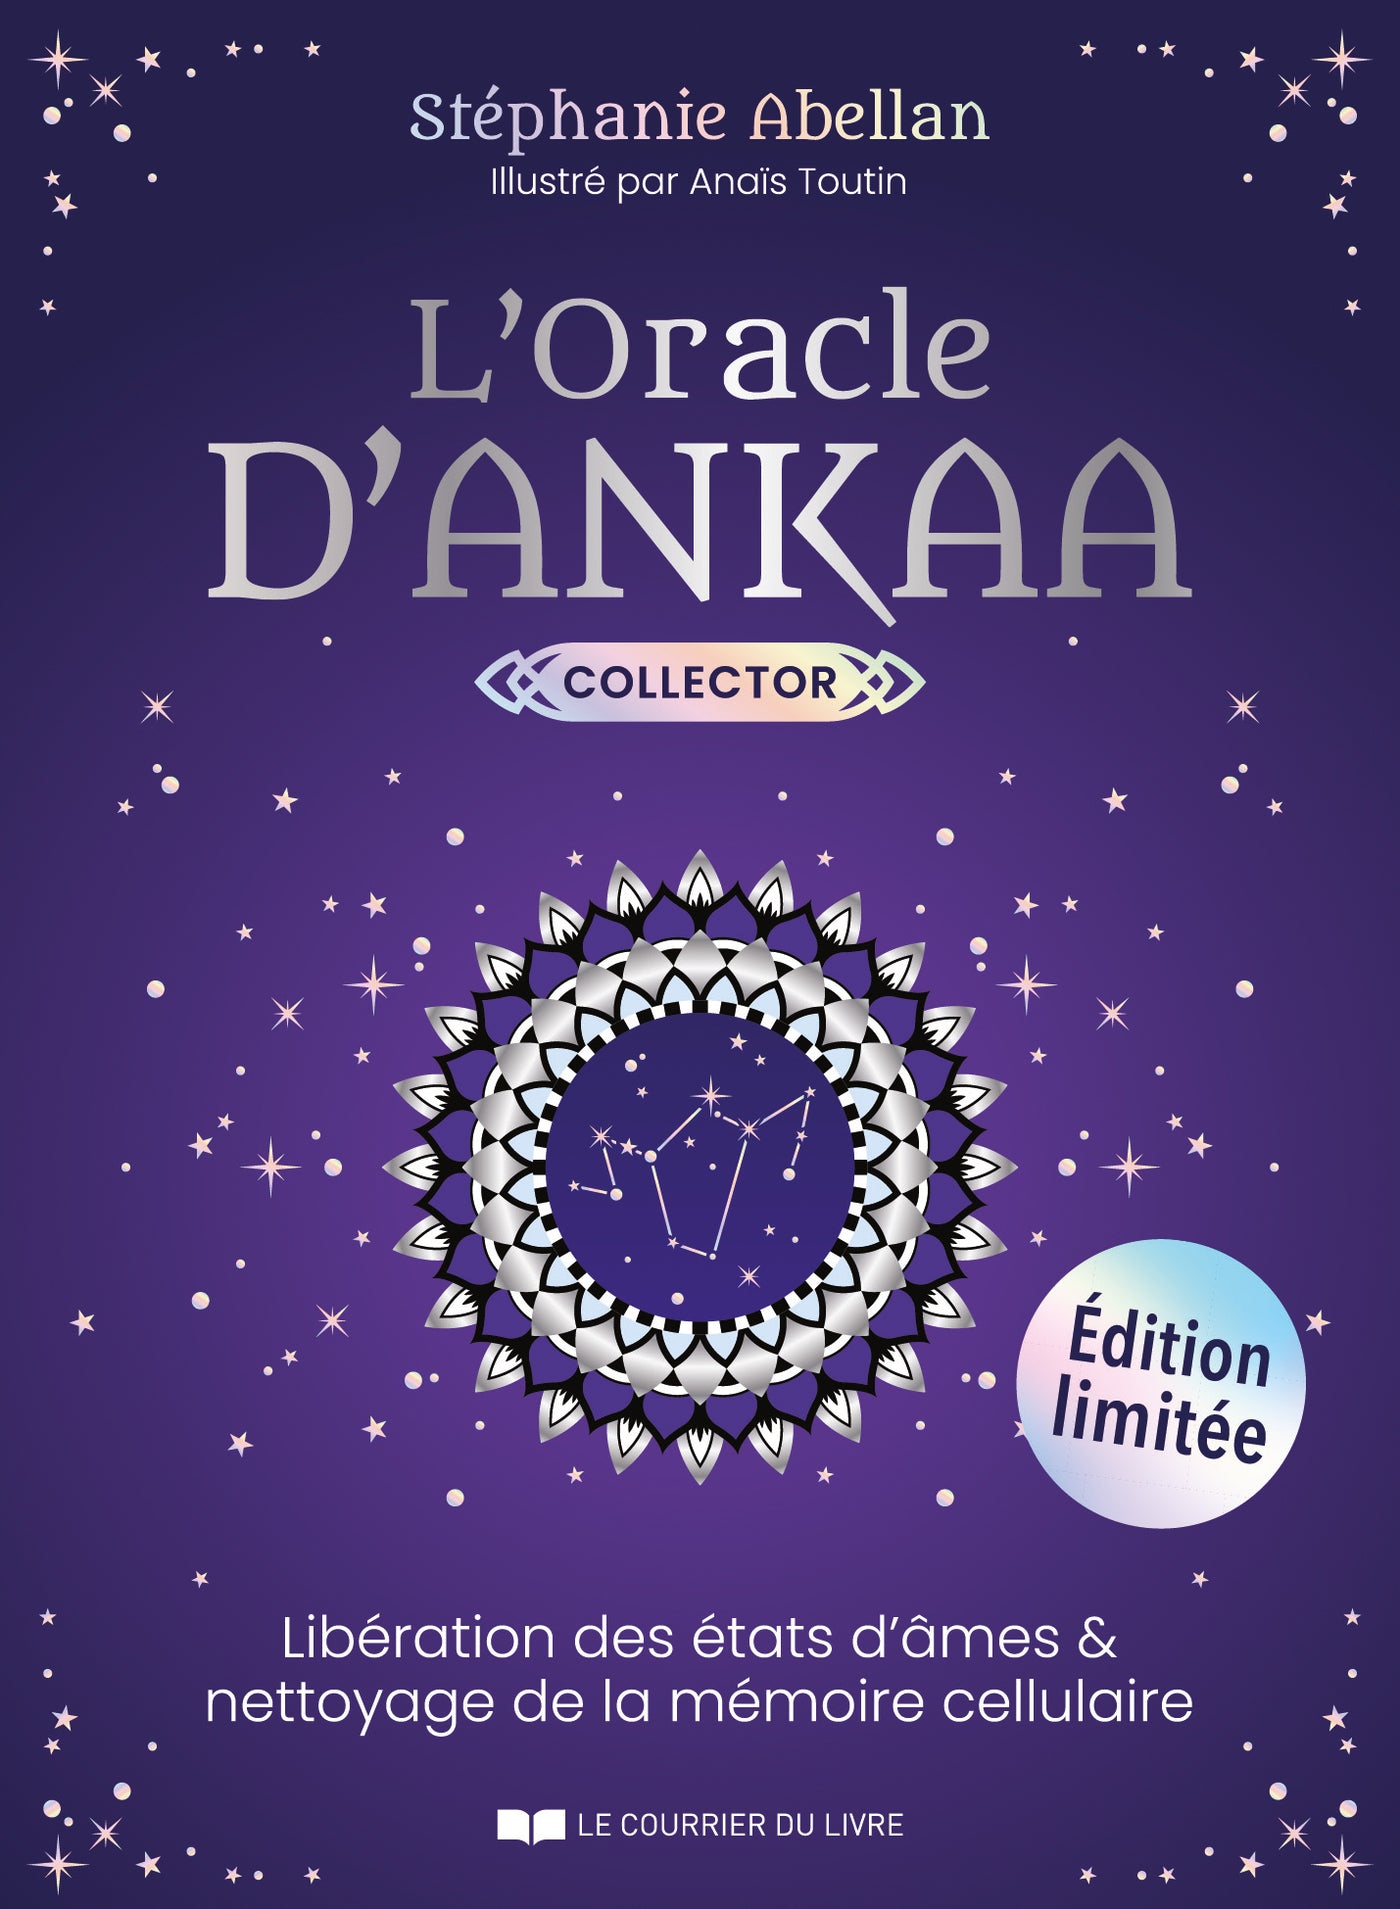 The Oracle of Ankaa Collector